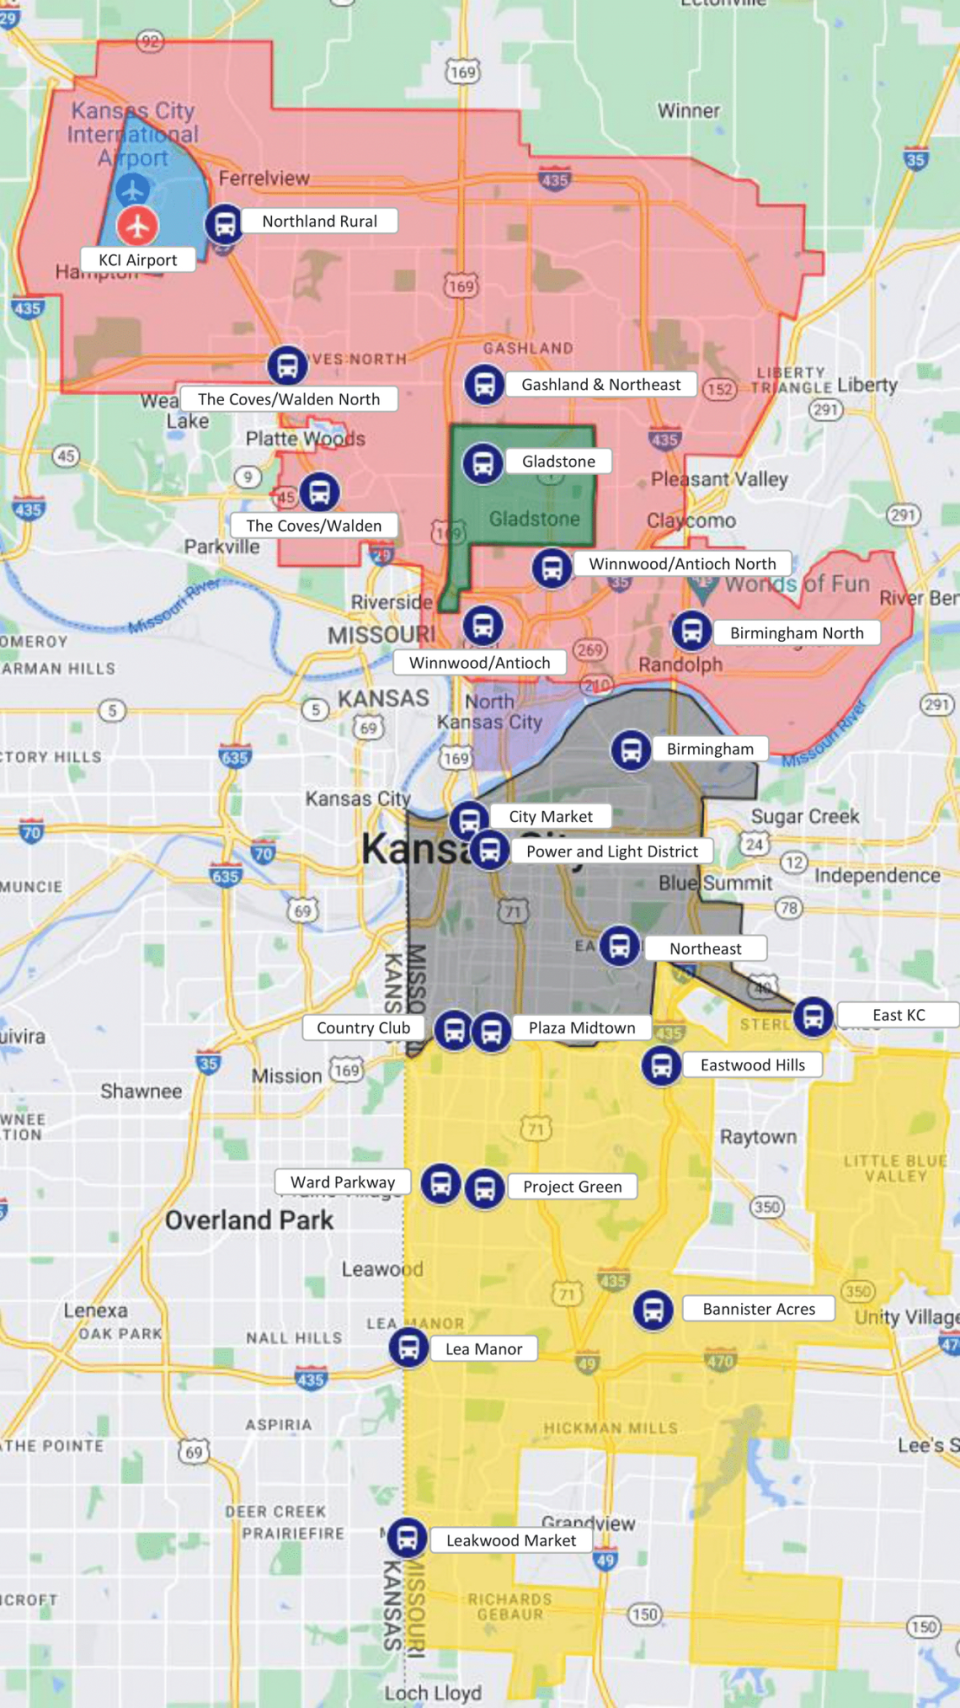 The coverage map for IRIS, Kansas City’s newest rideshare service. It recently expanded coverage to Kansas City and Gladstone after starting in the Northland